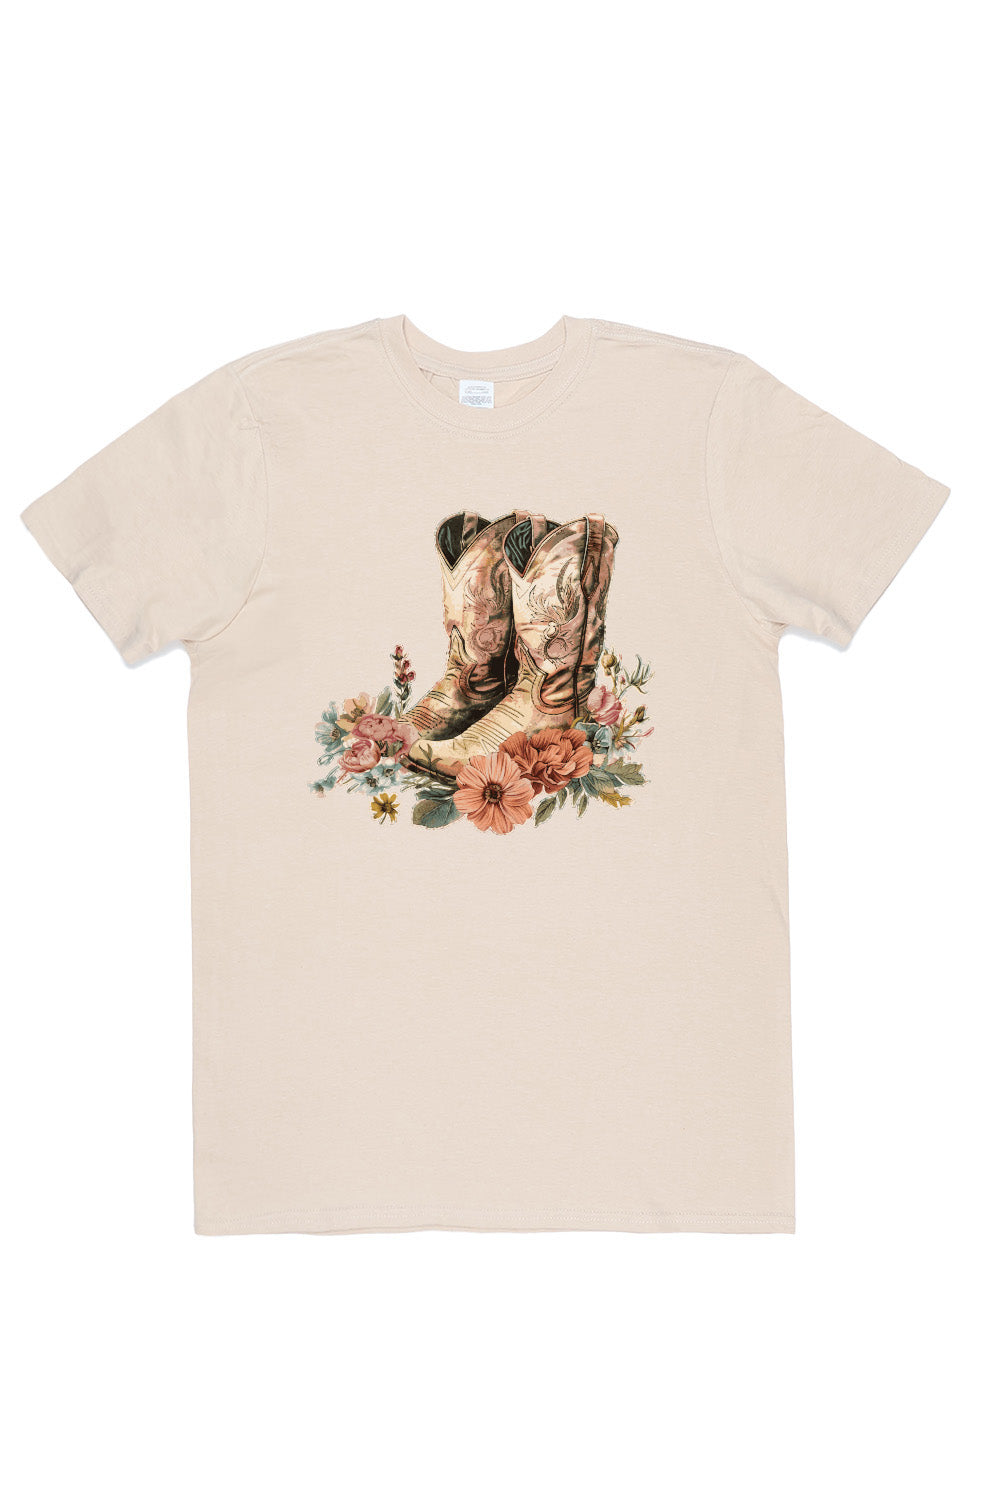 Cowboy boots with flowers T-Shirt in Sand (Custom Packs)